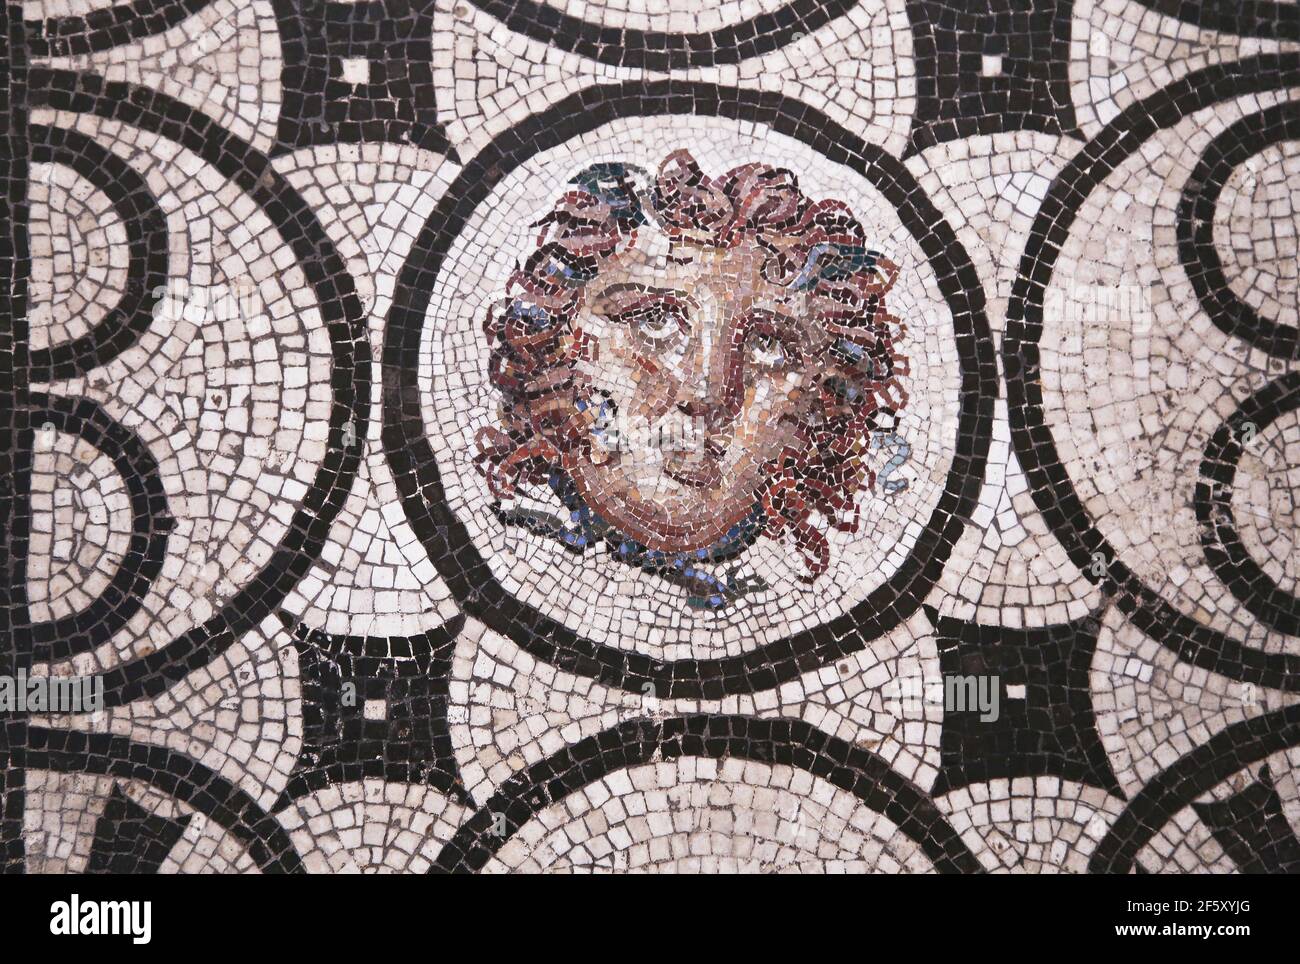 Head of Medusa, mosaic (detail). House of the vestals, Pompeii. 1st century AD. Roman work. Naples Archaeological Museum. Italy. Stock Photo